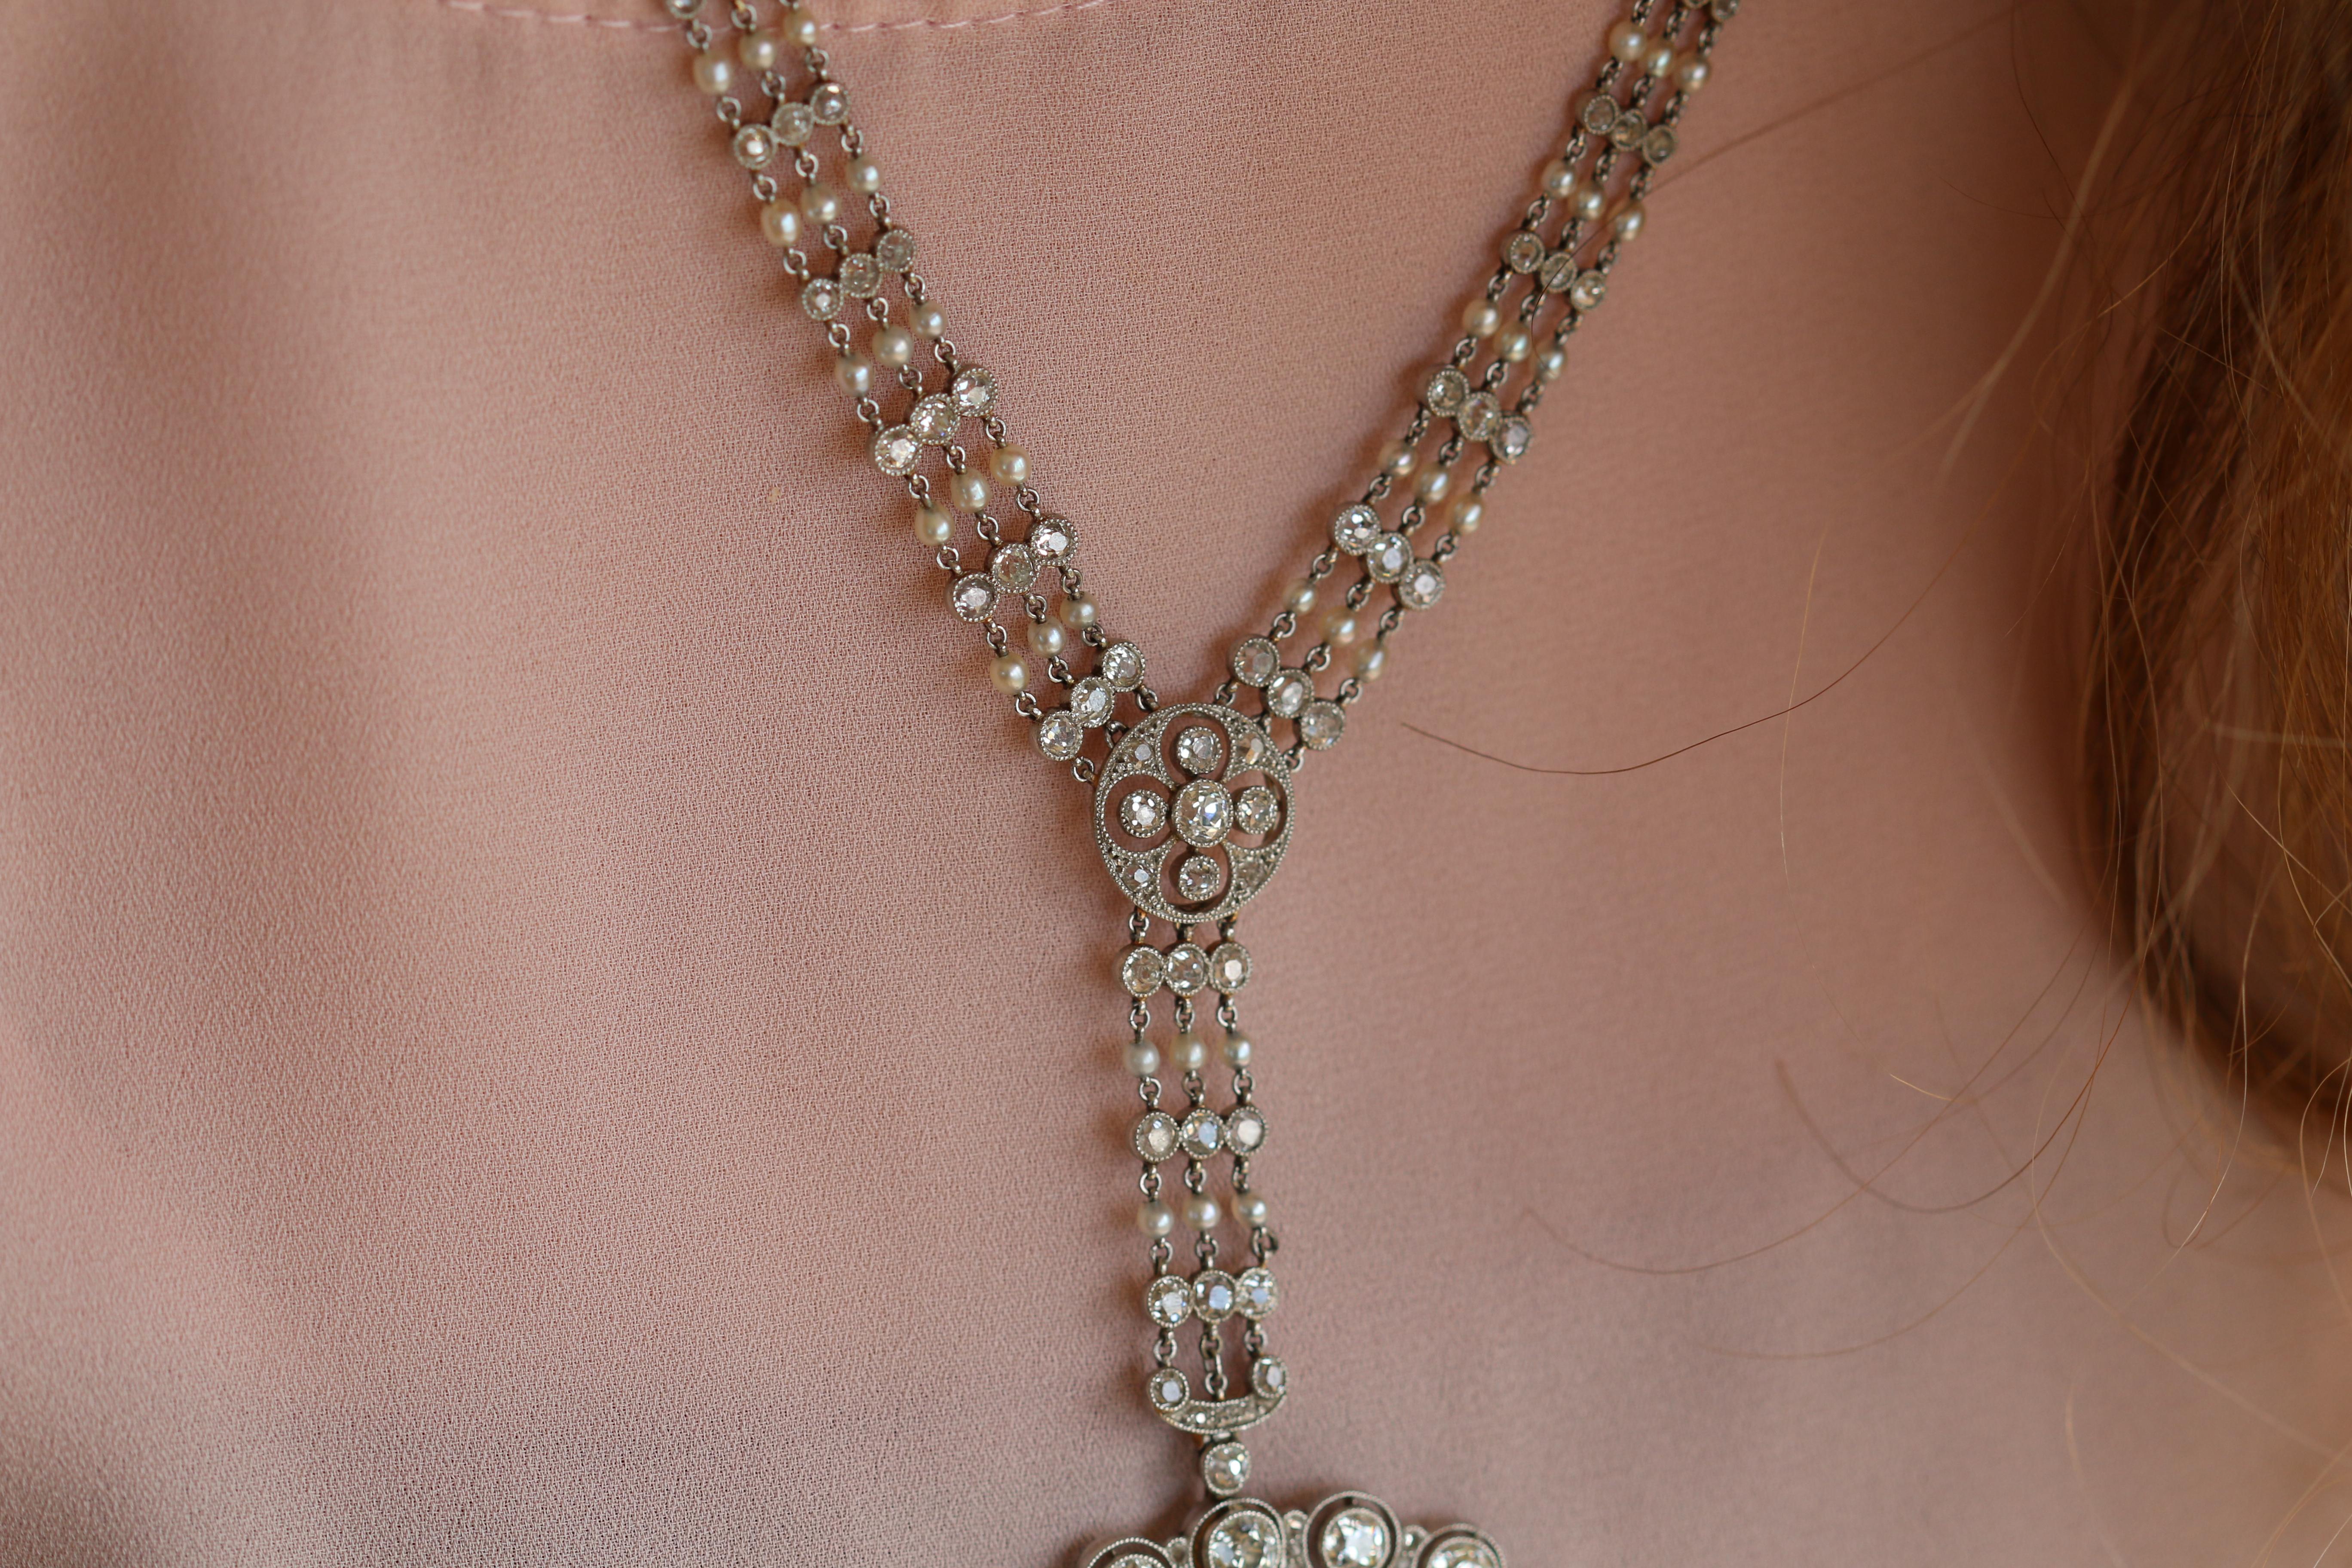 Rare Edwardian Platinum Diamond and Seed Pearl Pendant Necklace, circa 1910 For Sale 1